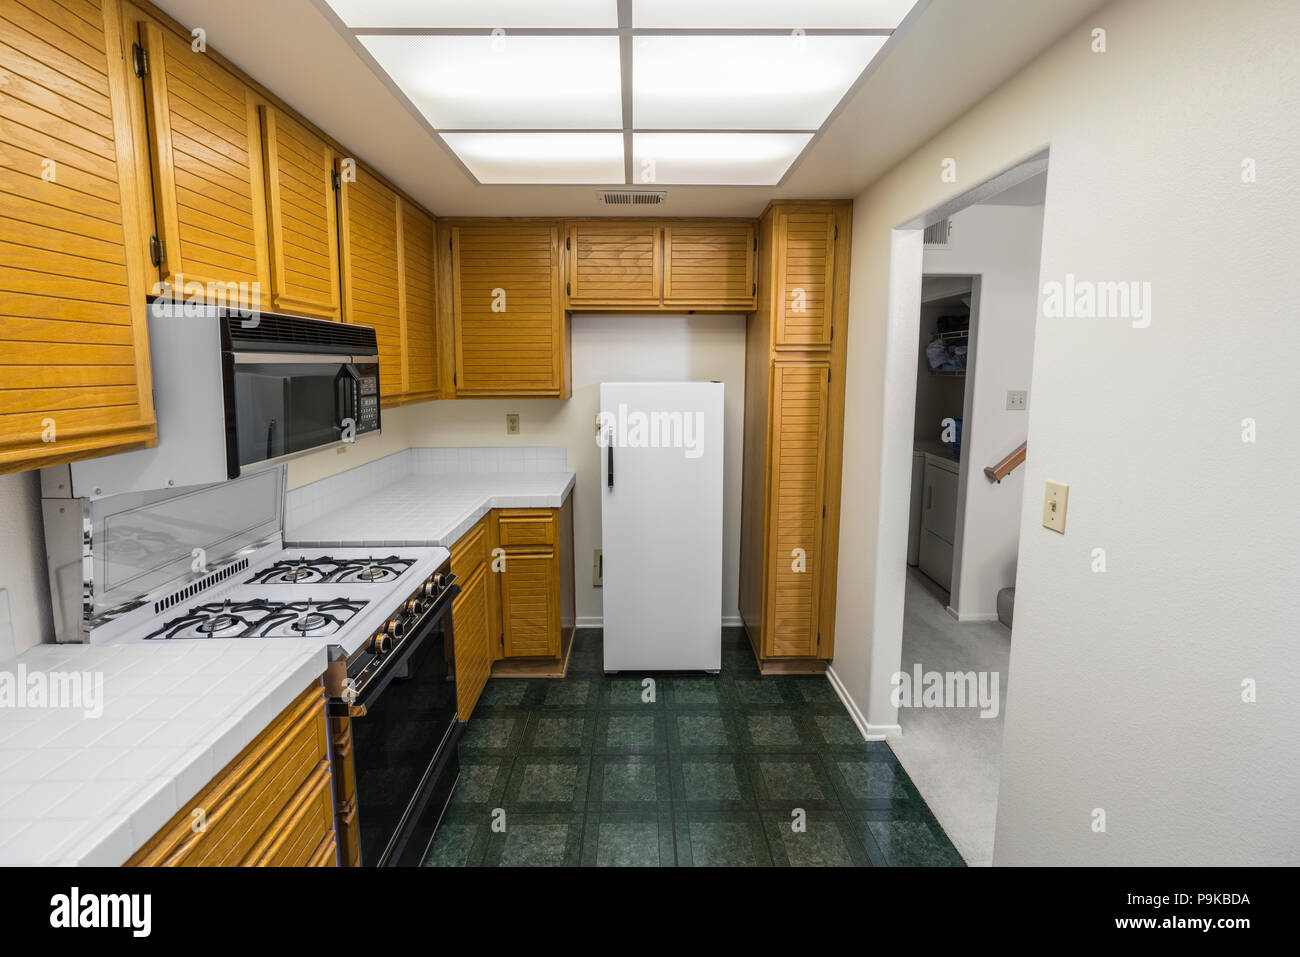 Old 1980s condo kitchen with oak cabinets, tile countertops, gas stove and green flooring. Stock Photo